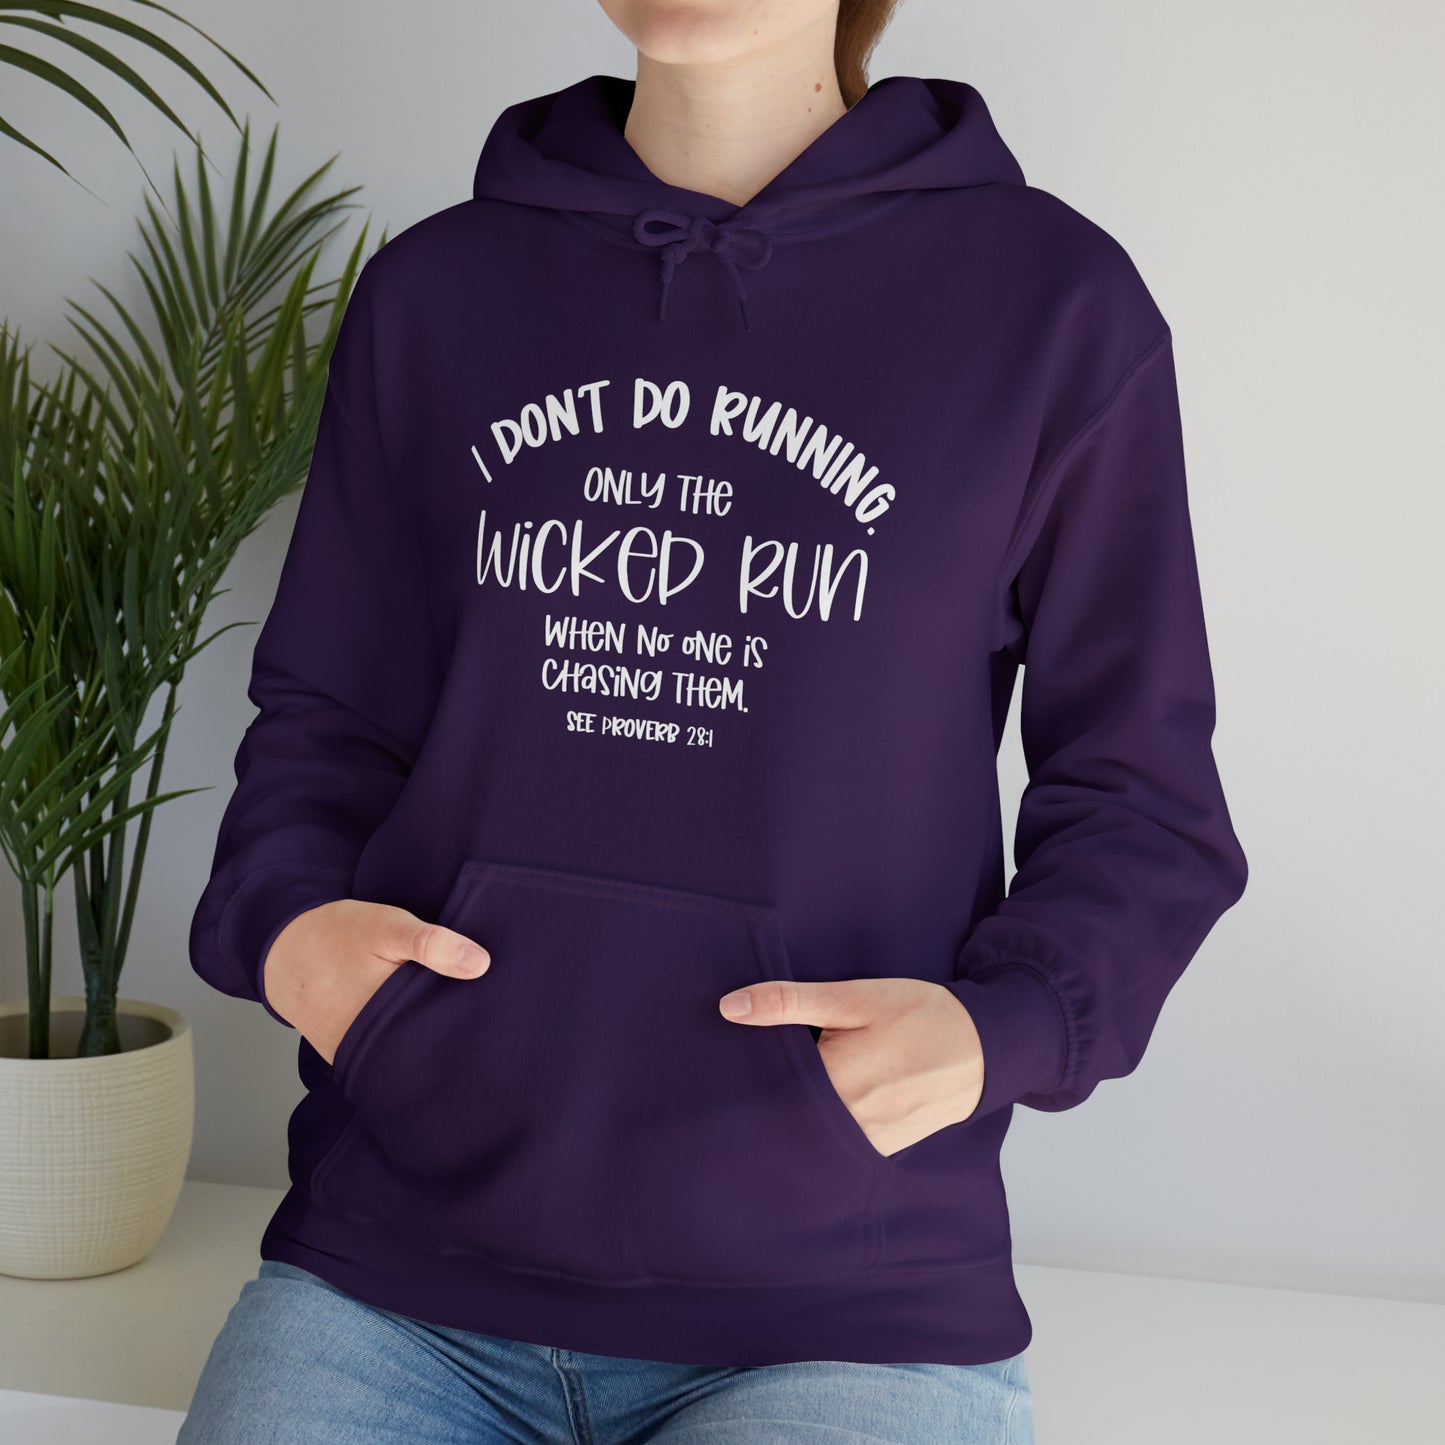 Only the wicked run when no one is chasing them | Christian Sweatshirt | Christian Apparel | Faith Inspiration